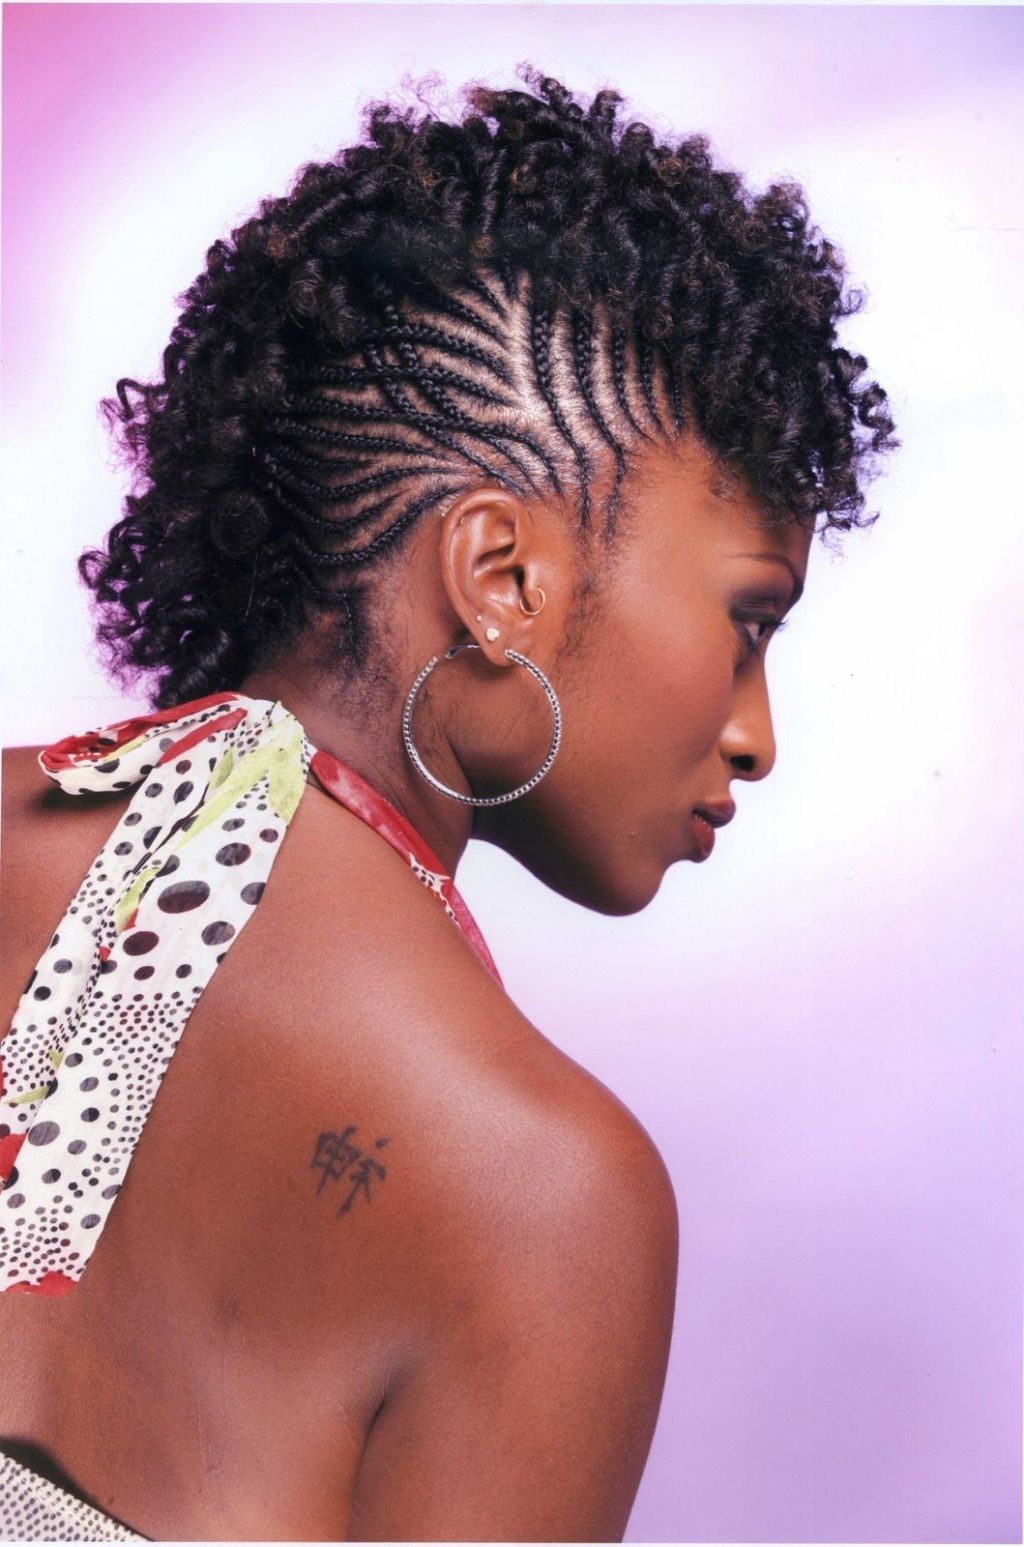 Most Recent Braided Hairstyles On Short Natural Hair Pertaining To √ 24+ Wonderful Braid Hairstyles For Natural Hair: Short Natural (View 7 of 15)